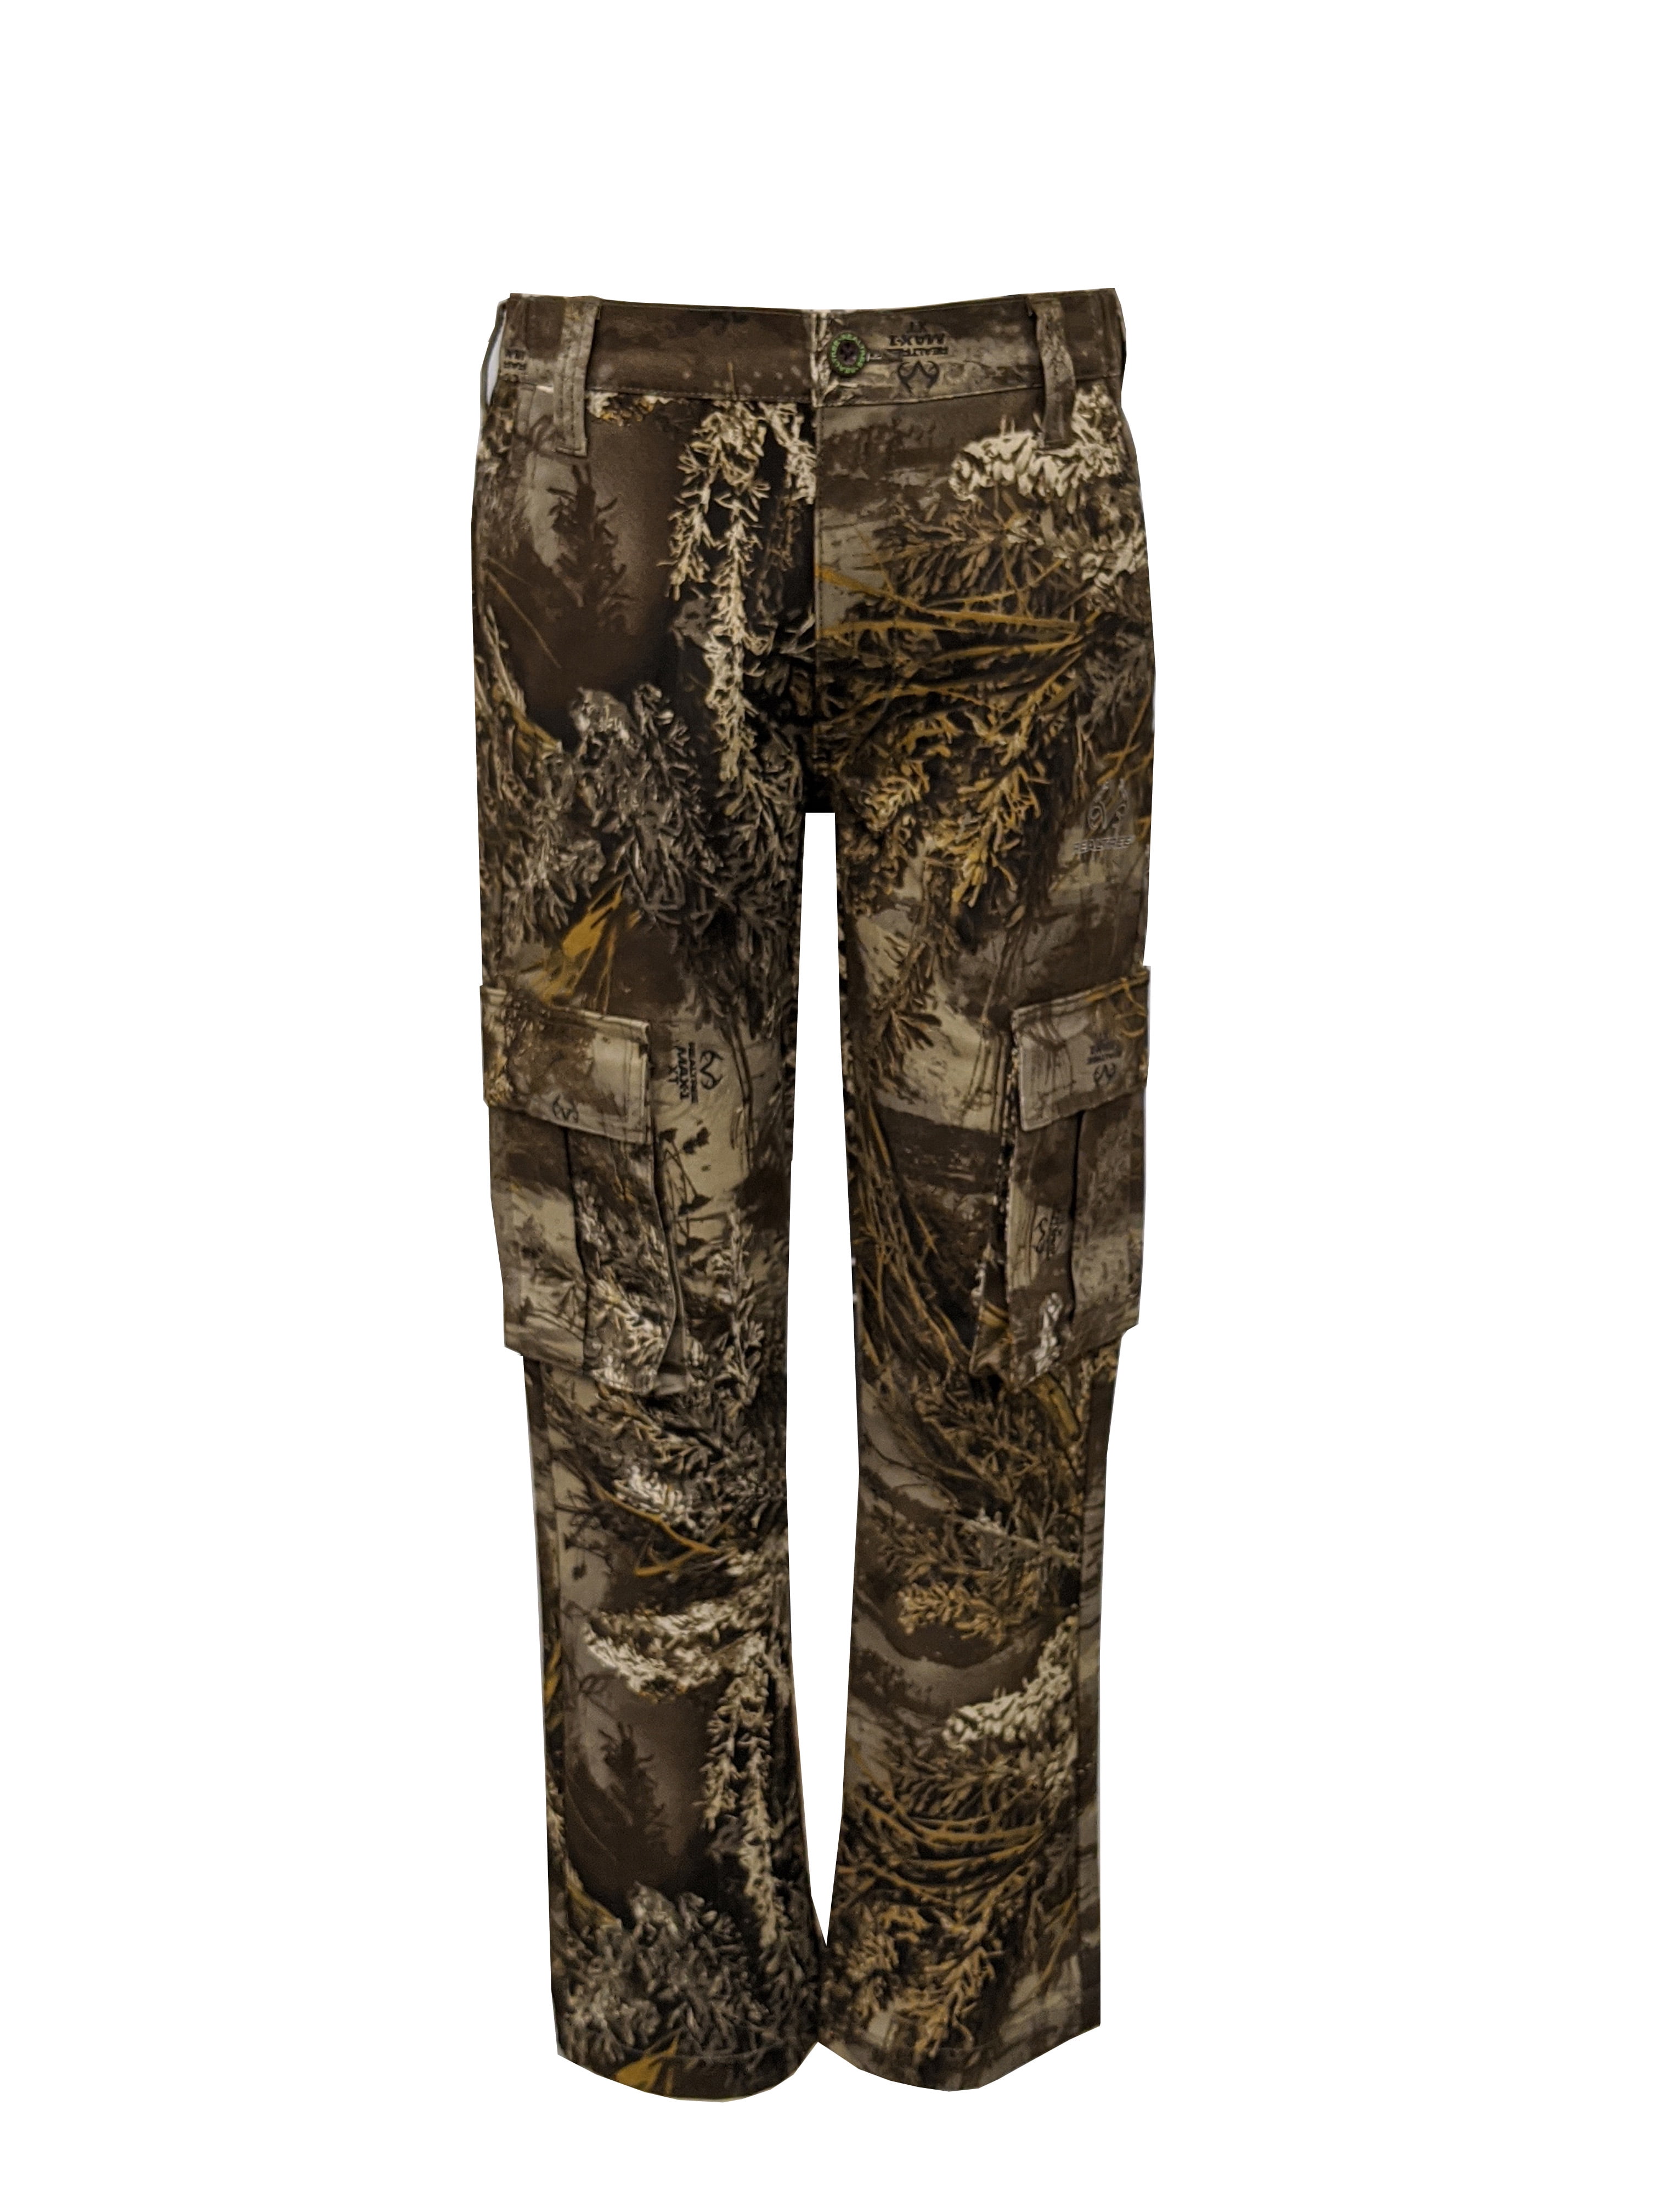 Realtree MAX-1-XT Youth Cargo Pant in 